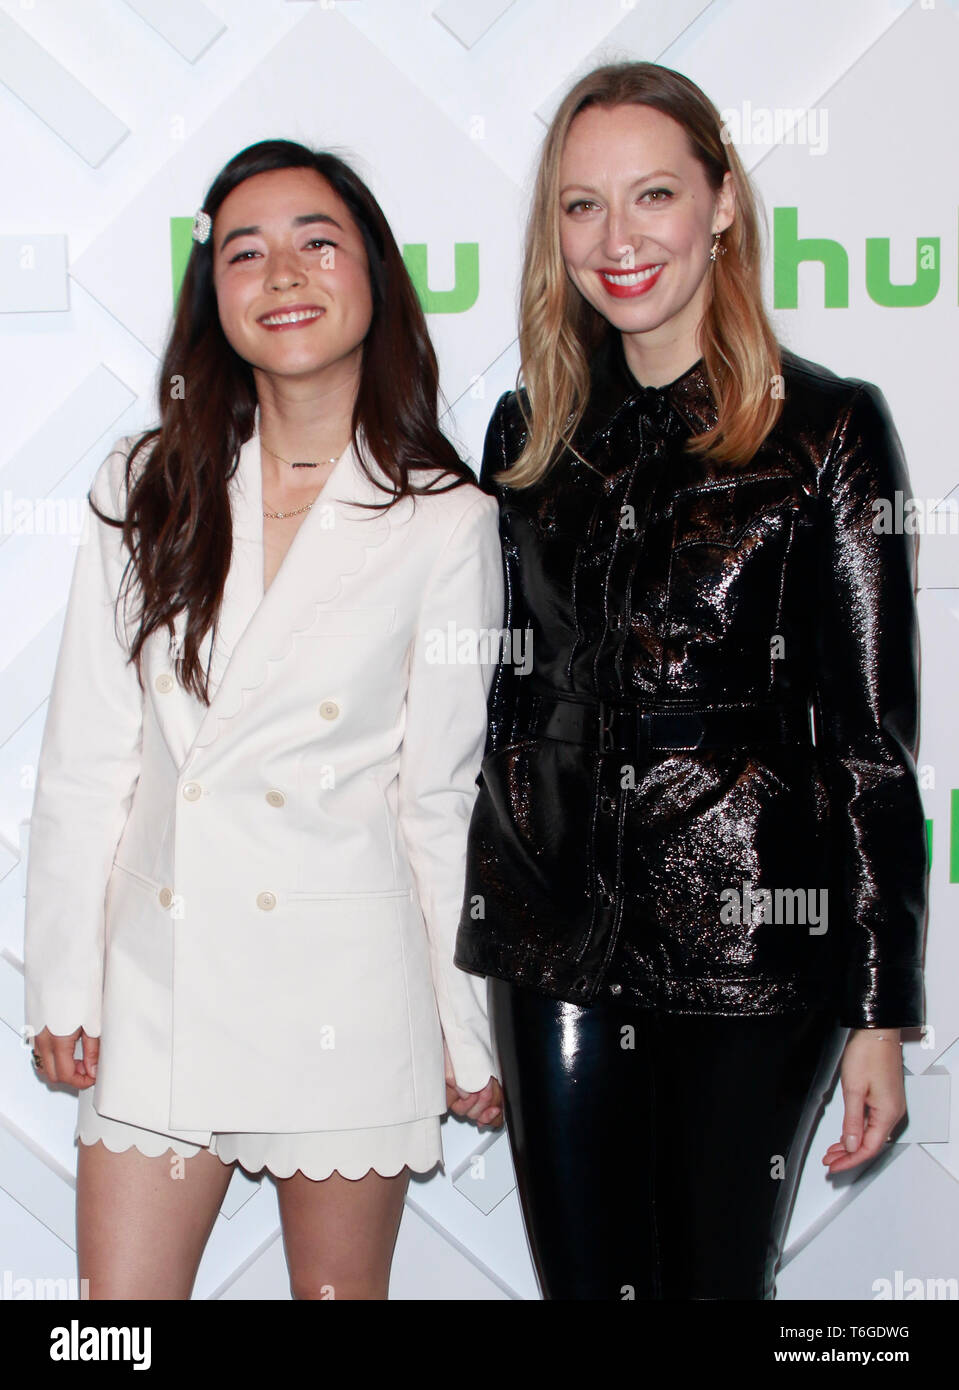 New York, NY, USA. 1st May, 2019. Maya Erskine and Anna Knokle at the Hulu 2019 Upfront Presentation at Scarpetta at the James Hotel in New York City on May 1, 2019. Credit: Diego Corredor/Media Punch/Alamy Live News Stock Photo